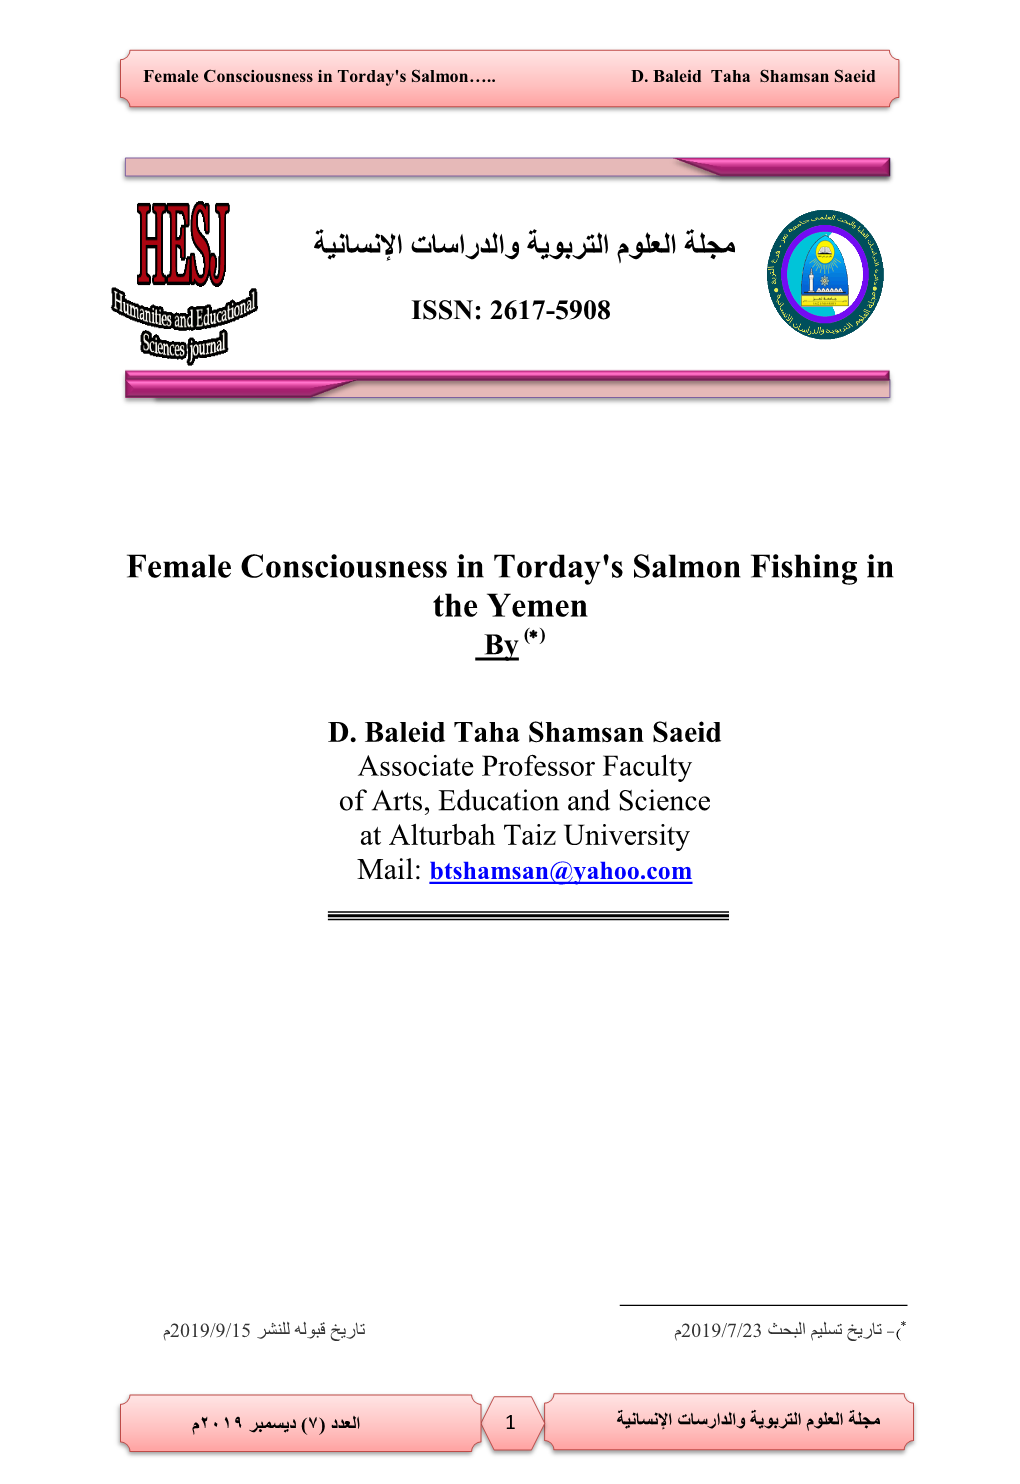 Female Consciousness in Torday's Salmon Fishing in the Yemen by ()